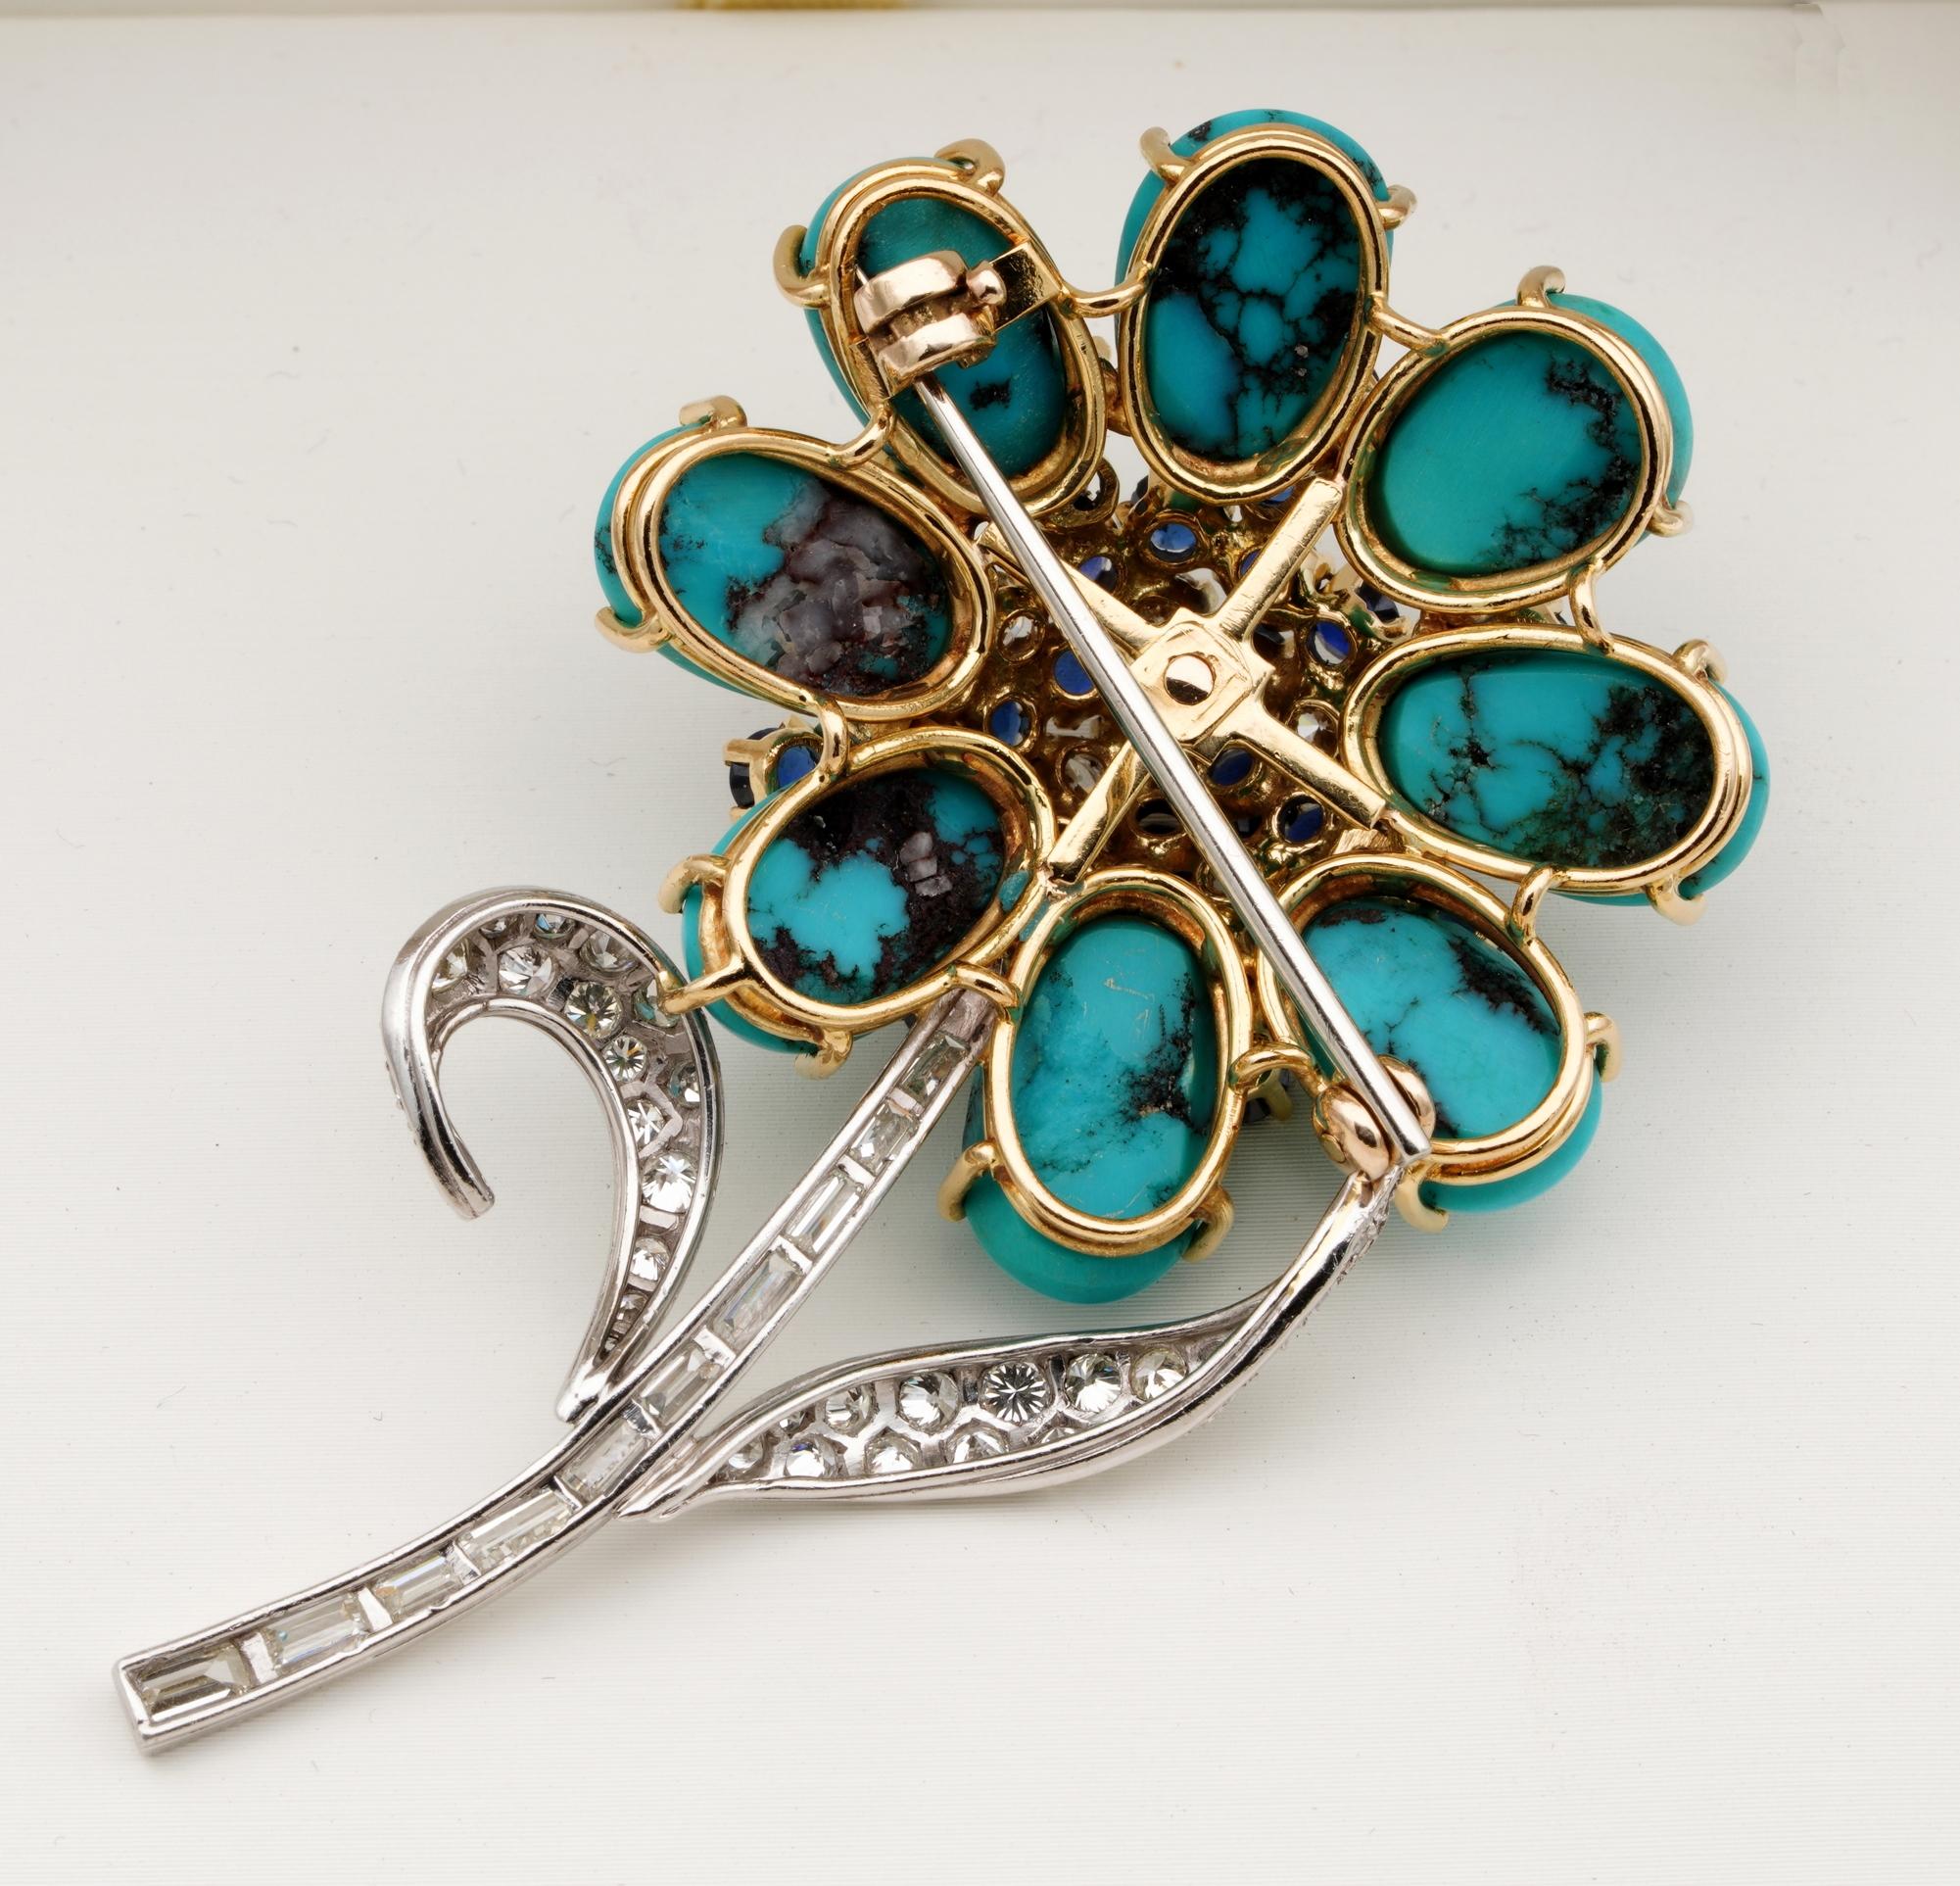 Remarkable Midcentury Persian Turquoise Diamond Sapphire Flower Brooch For Sale 1